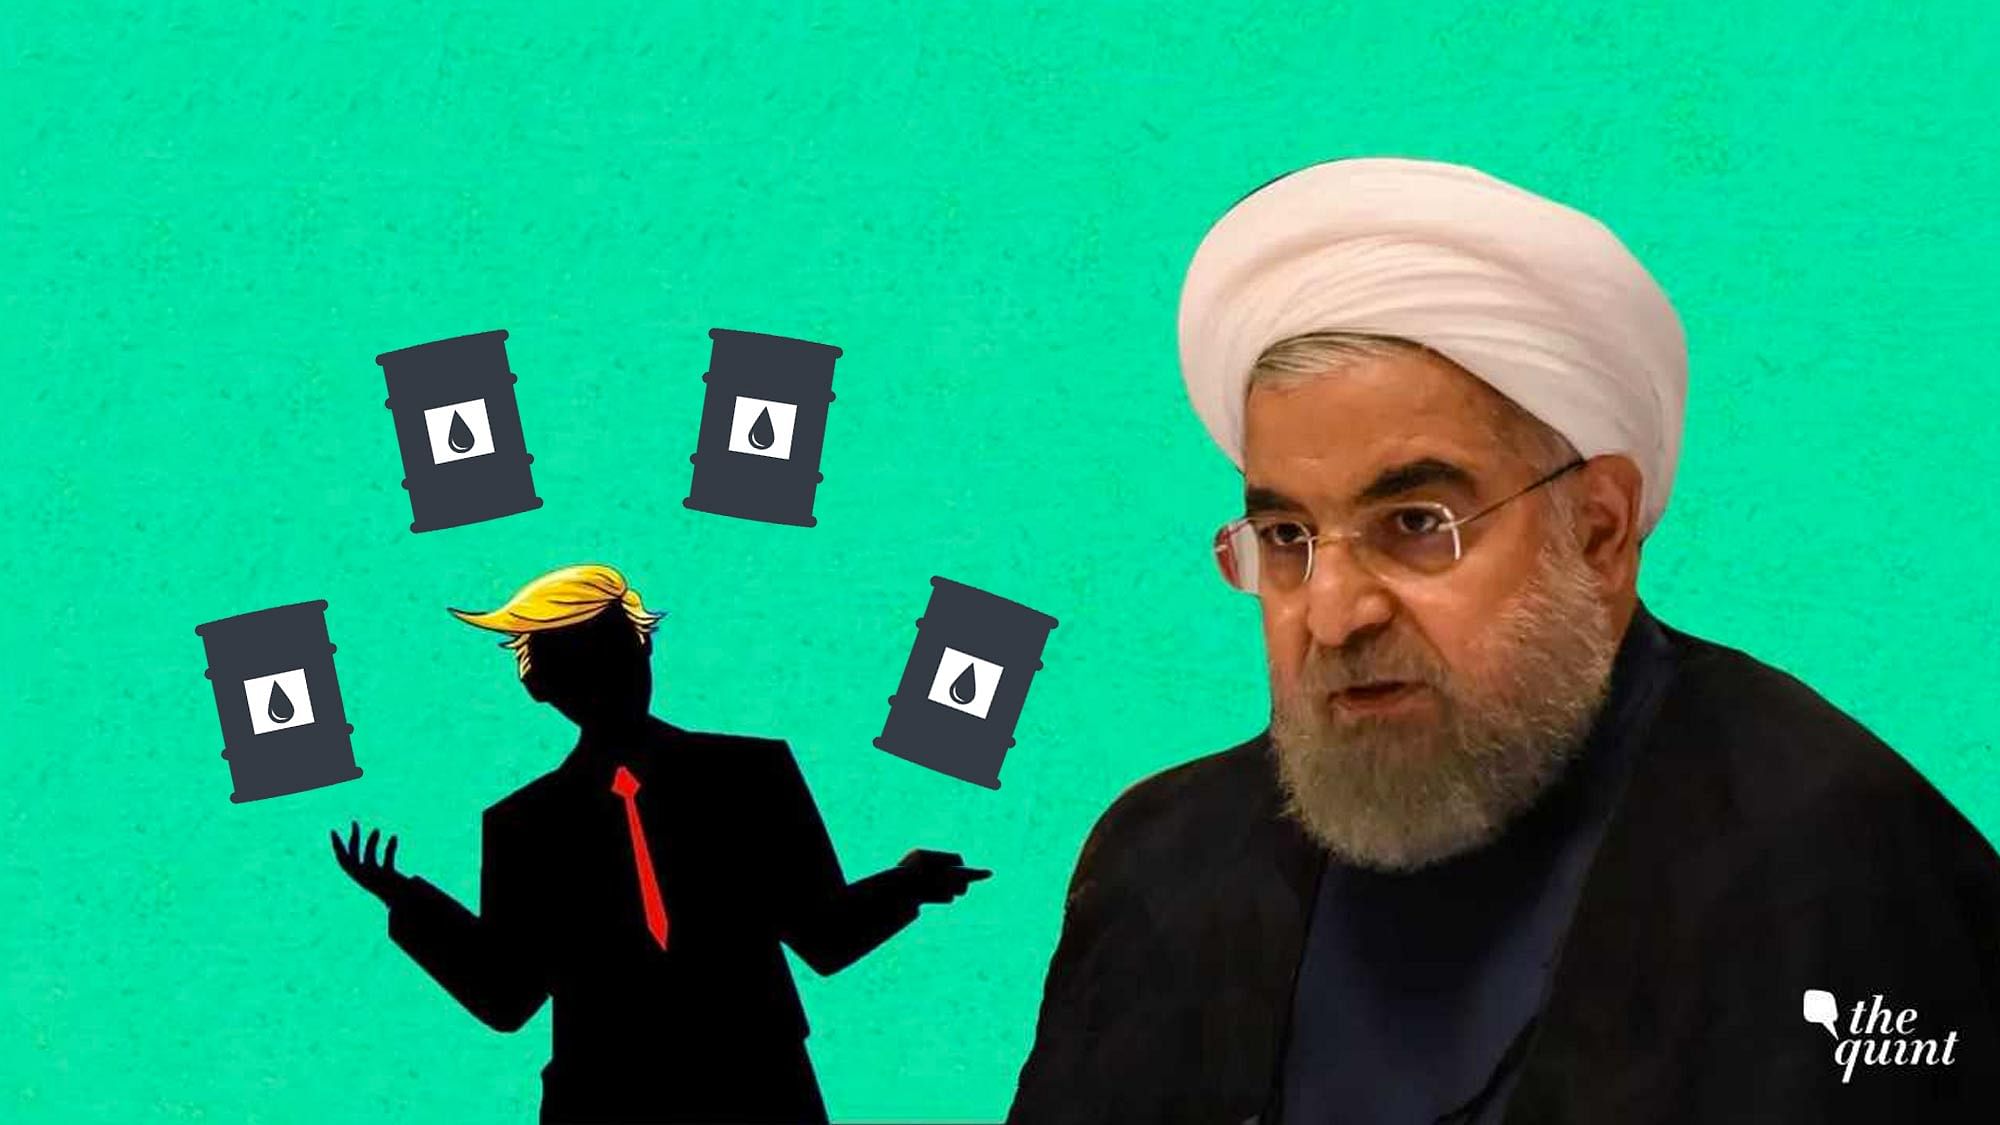 Image of Iran’s President Hassan Rouhani, and an artistic impression of US President Trump, used for representational purposes.